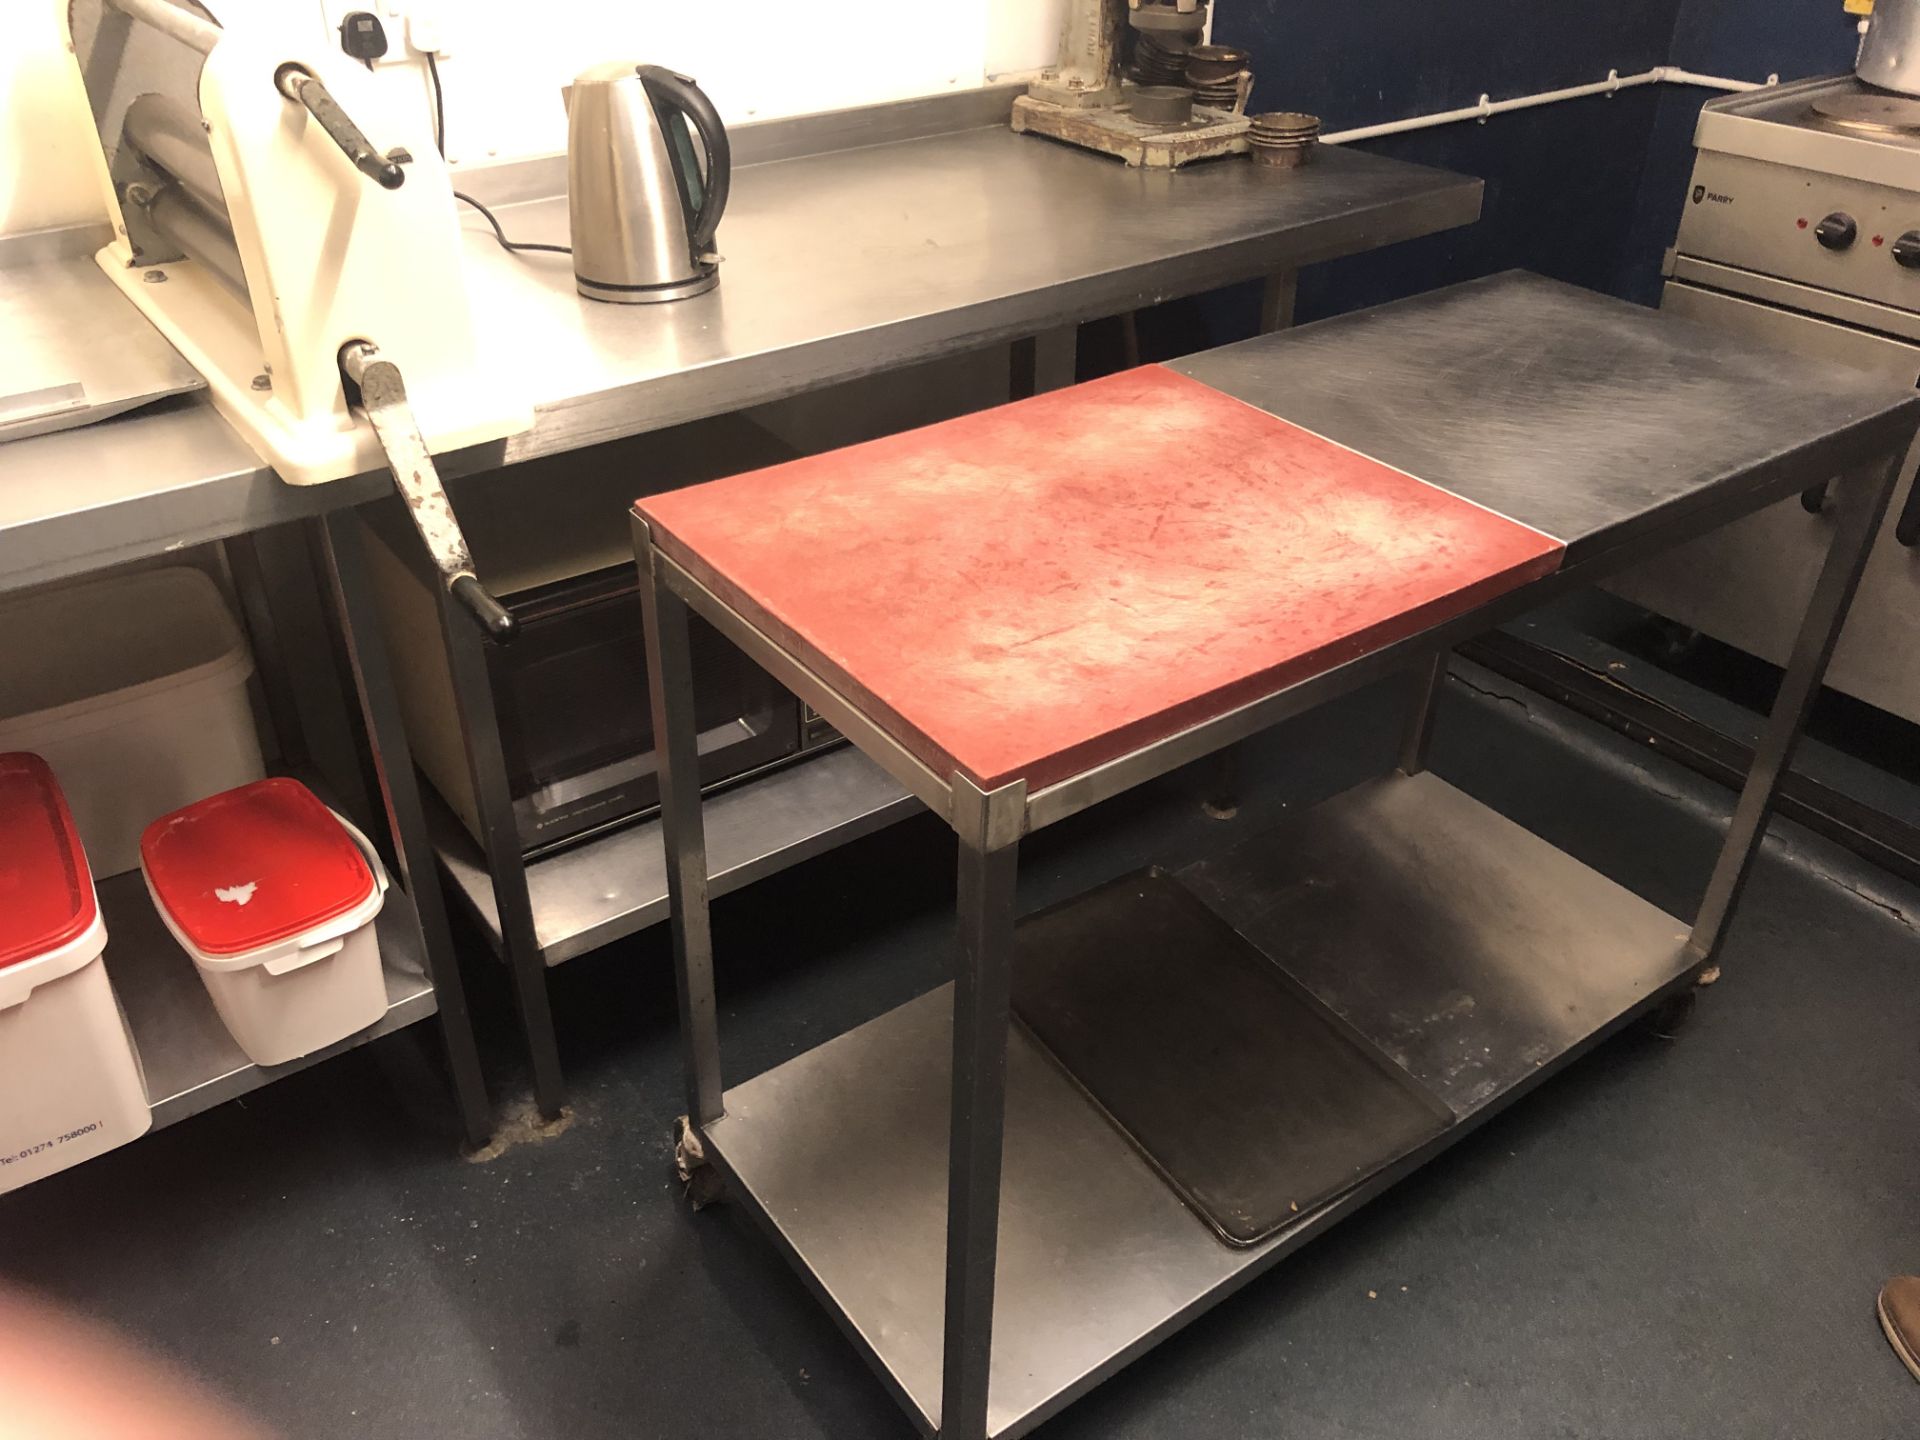 STAINLESS STEEL BENCH & CHOPPING BOARD - WHEELED BENCH 1200 x 500